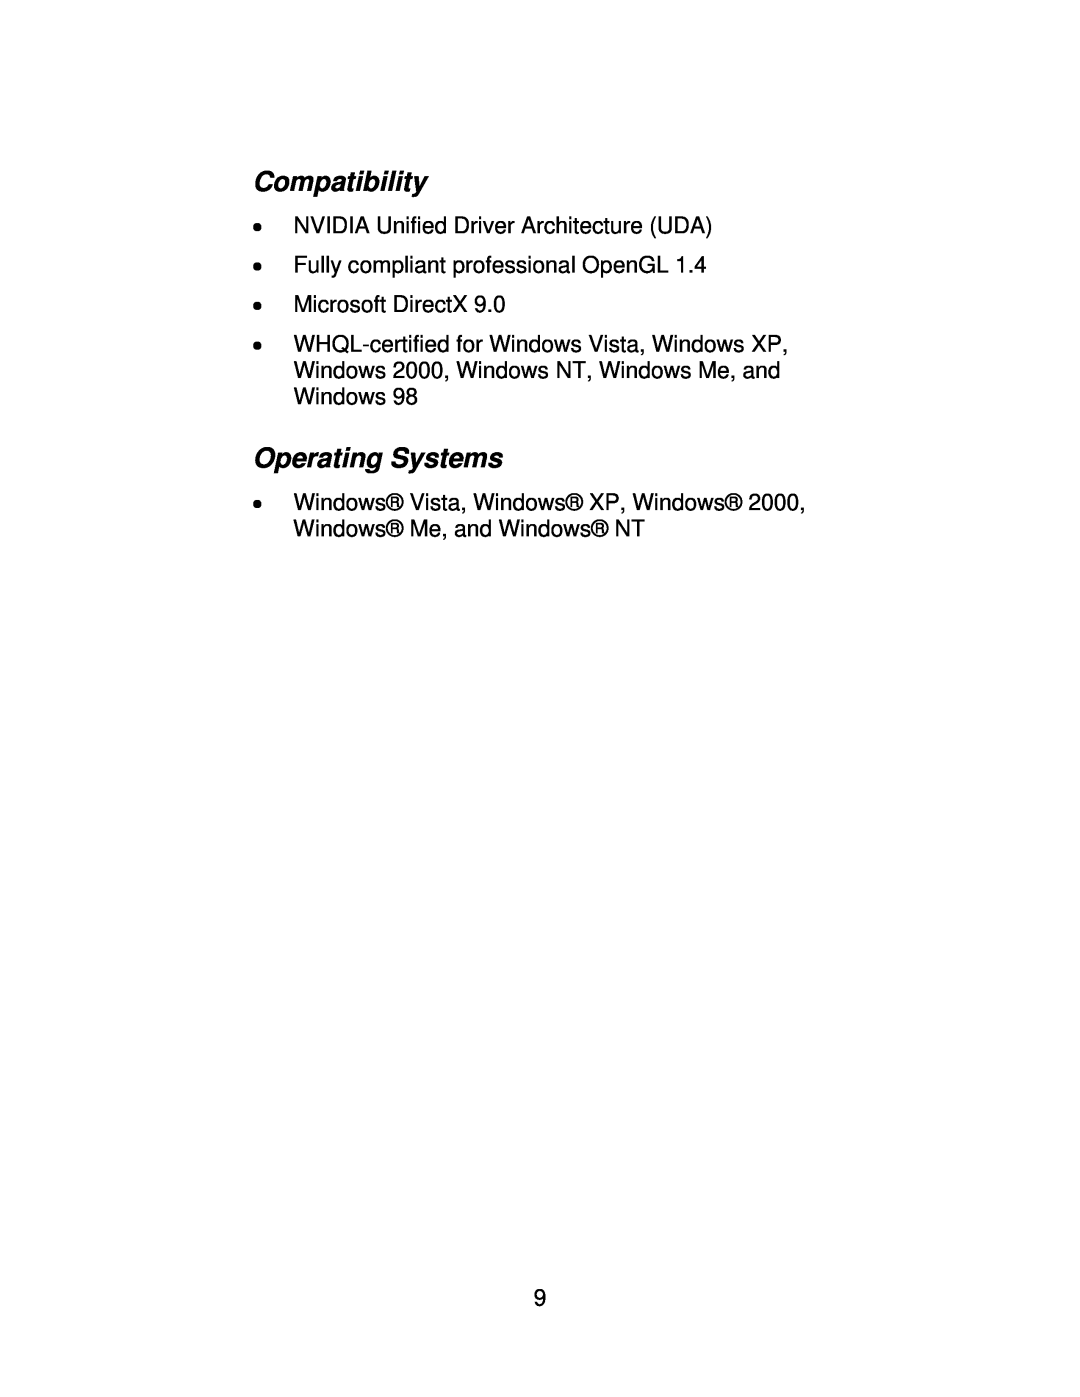 Jaton 5200 user manual Compatibility, Operating Systems, NVIDIA Unified Driver Architecture UDA 